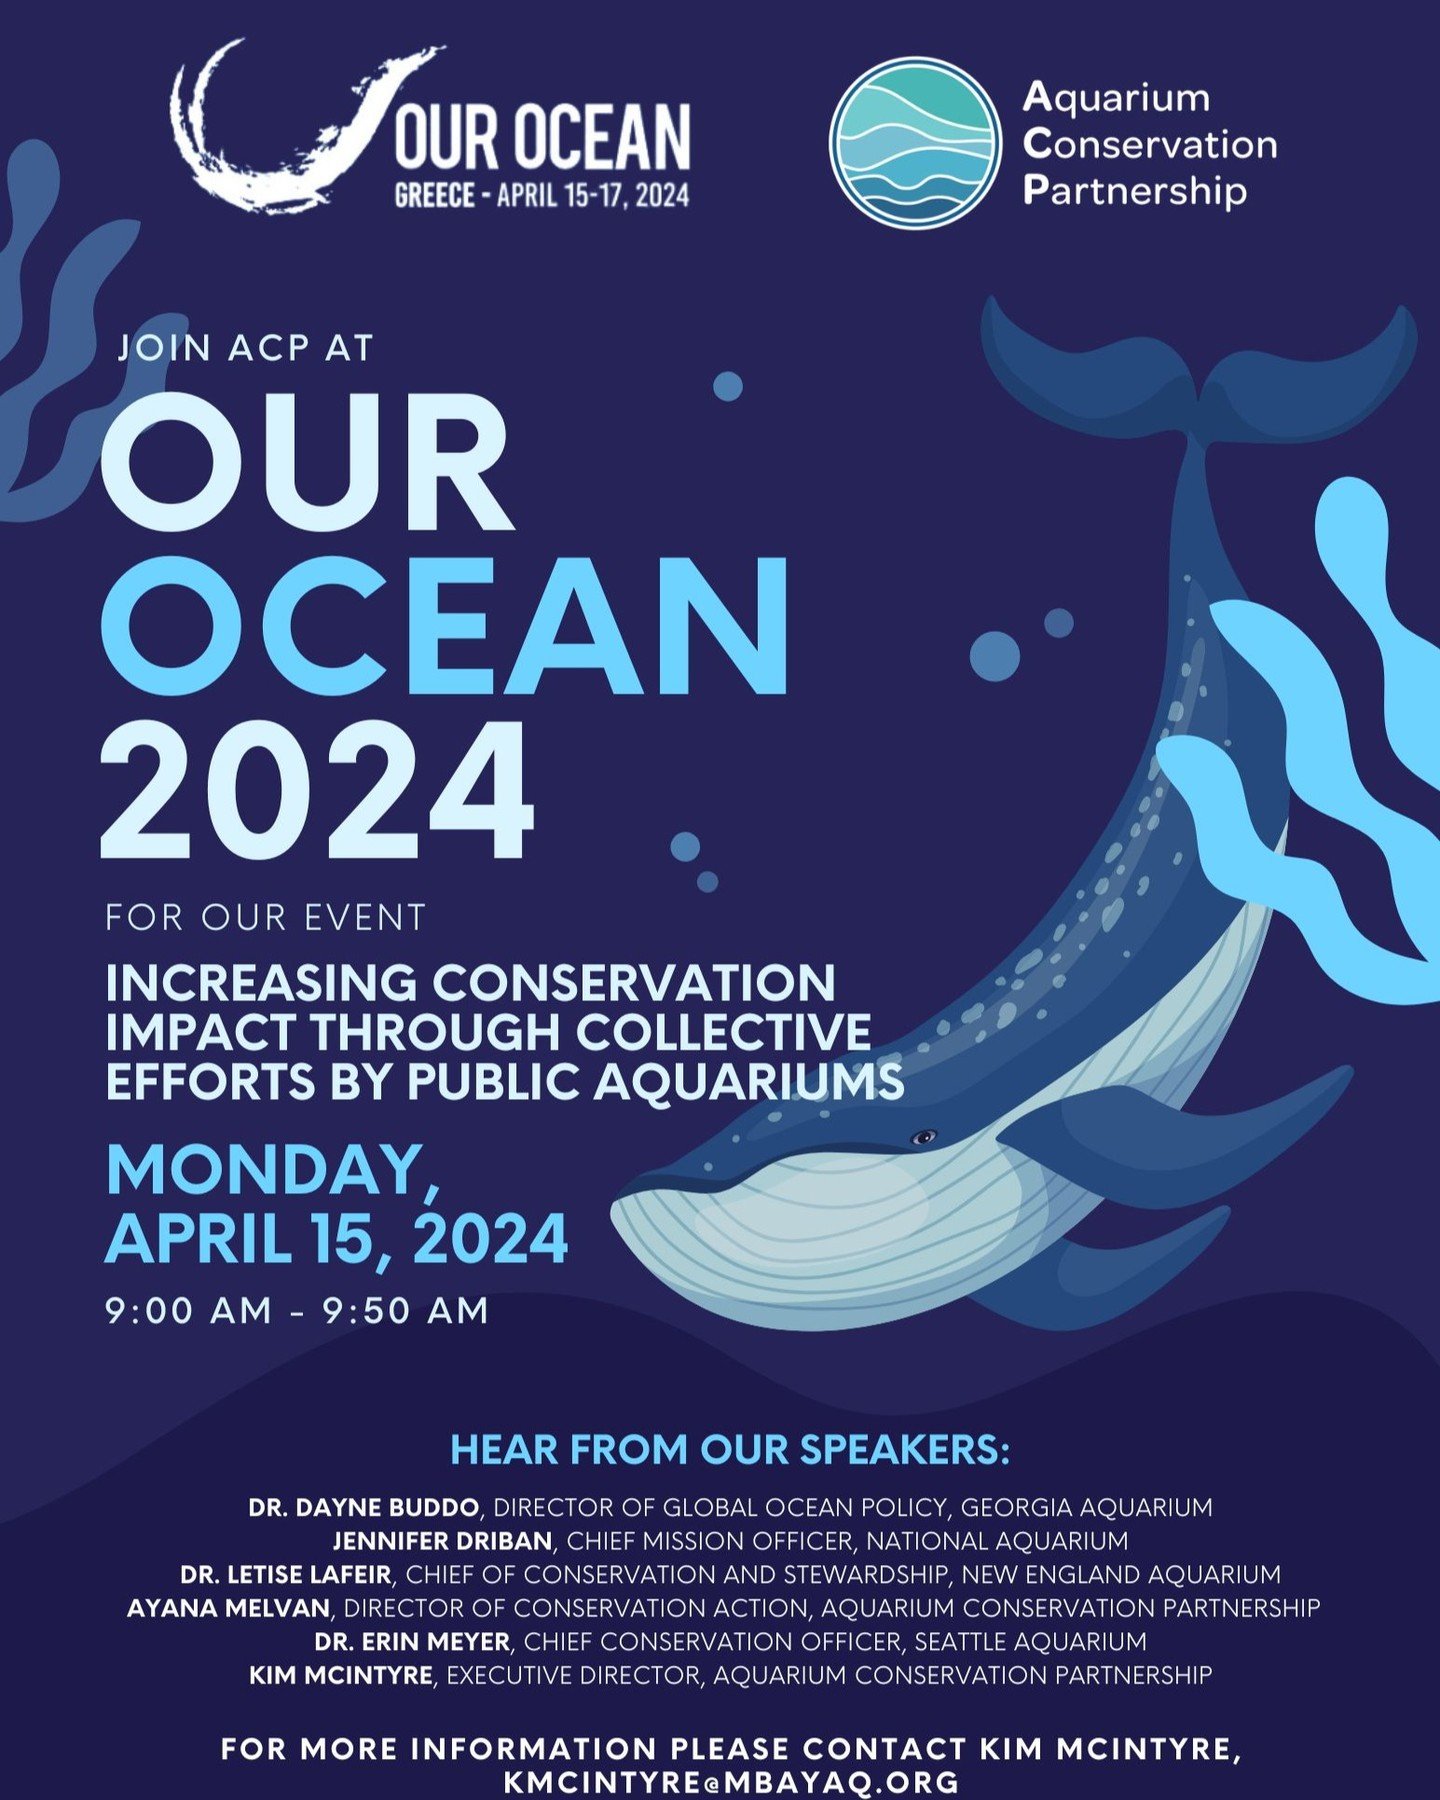 ACP will be attending @ourocean2024! During our time at Our Ocean, ACP will be speaking on how we increase our conservation impact through public aquariums. 

If you are participating in Our Ocean, please join us for our side event next Monday, April